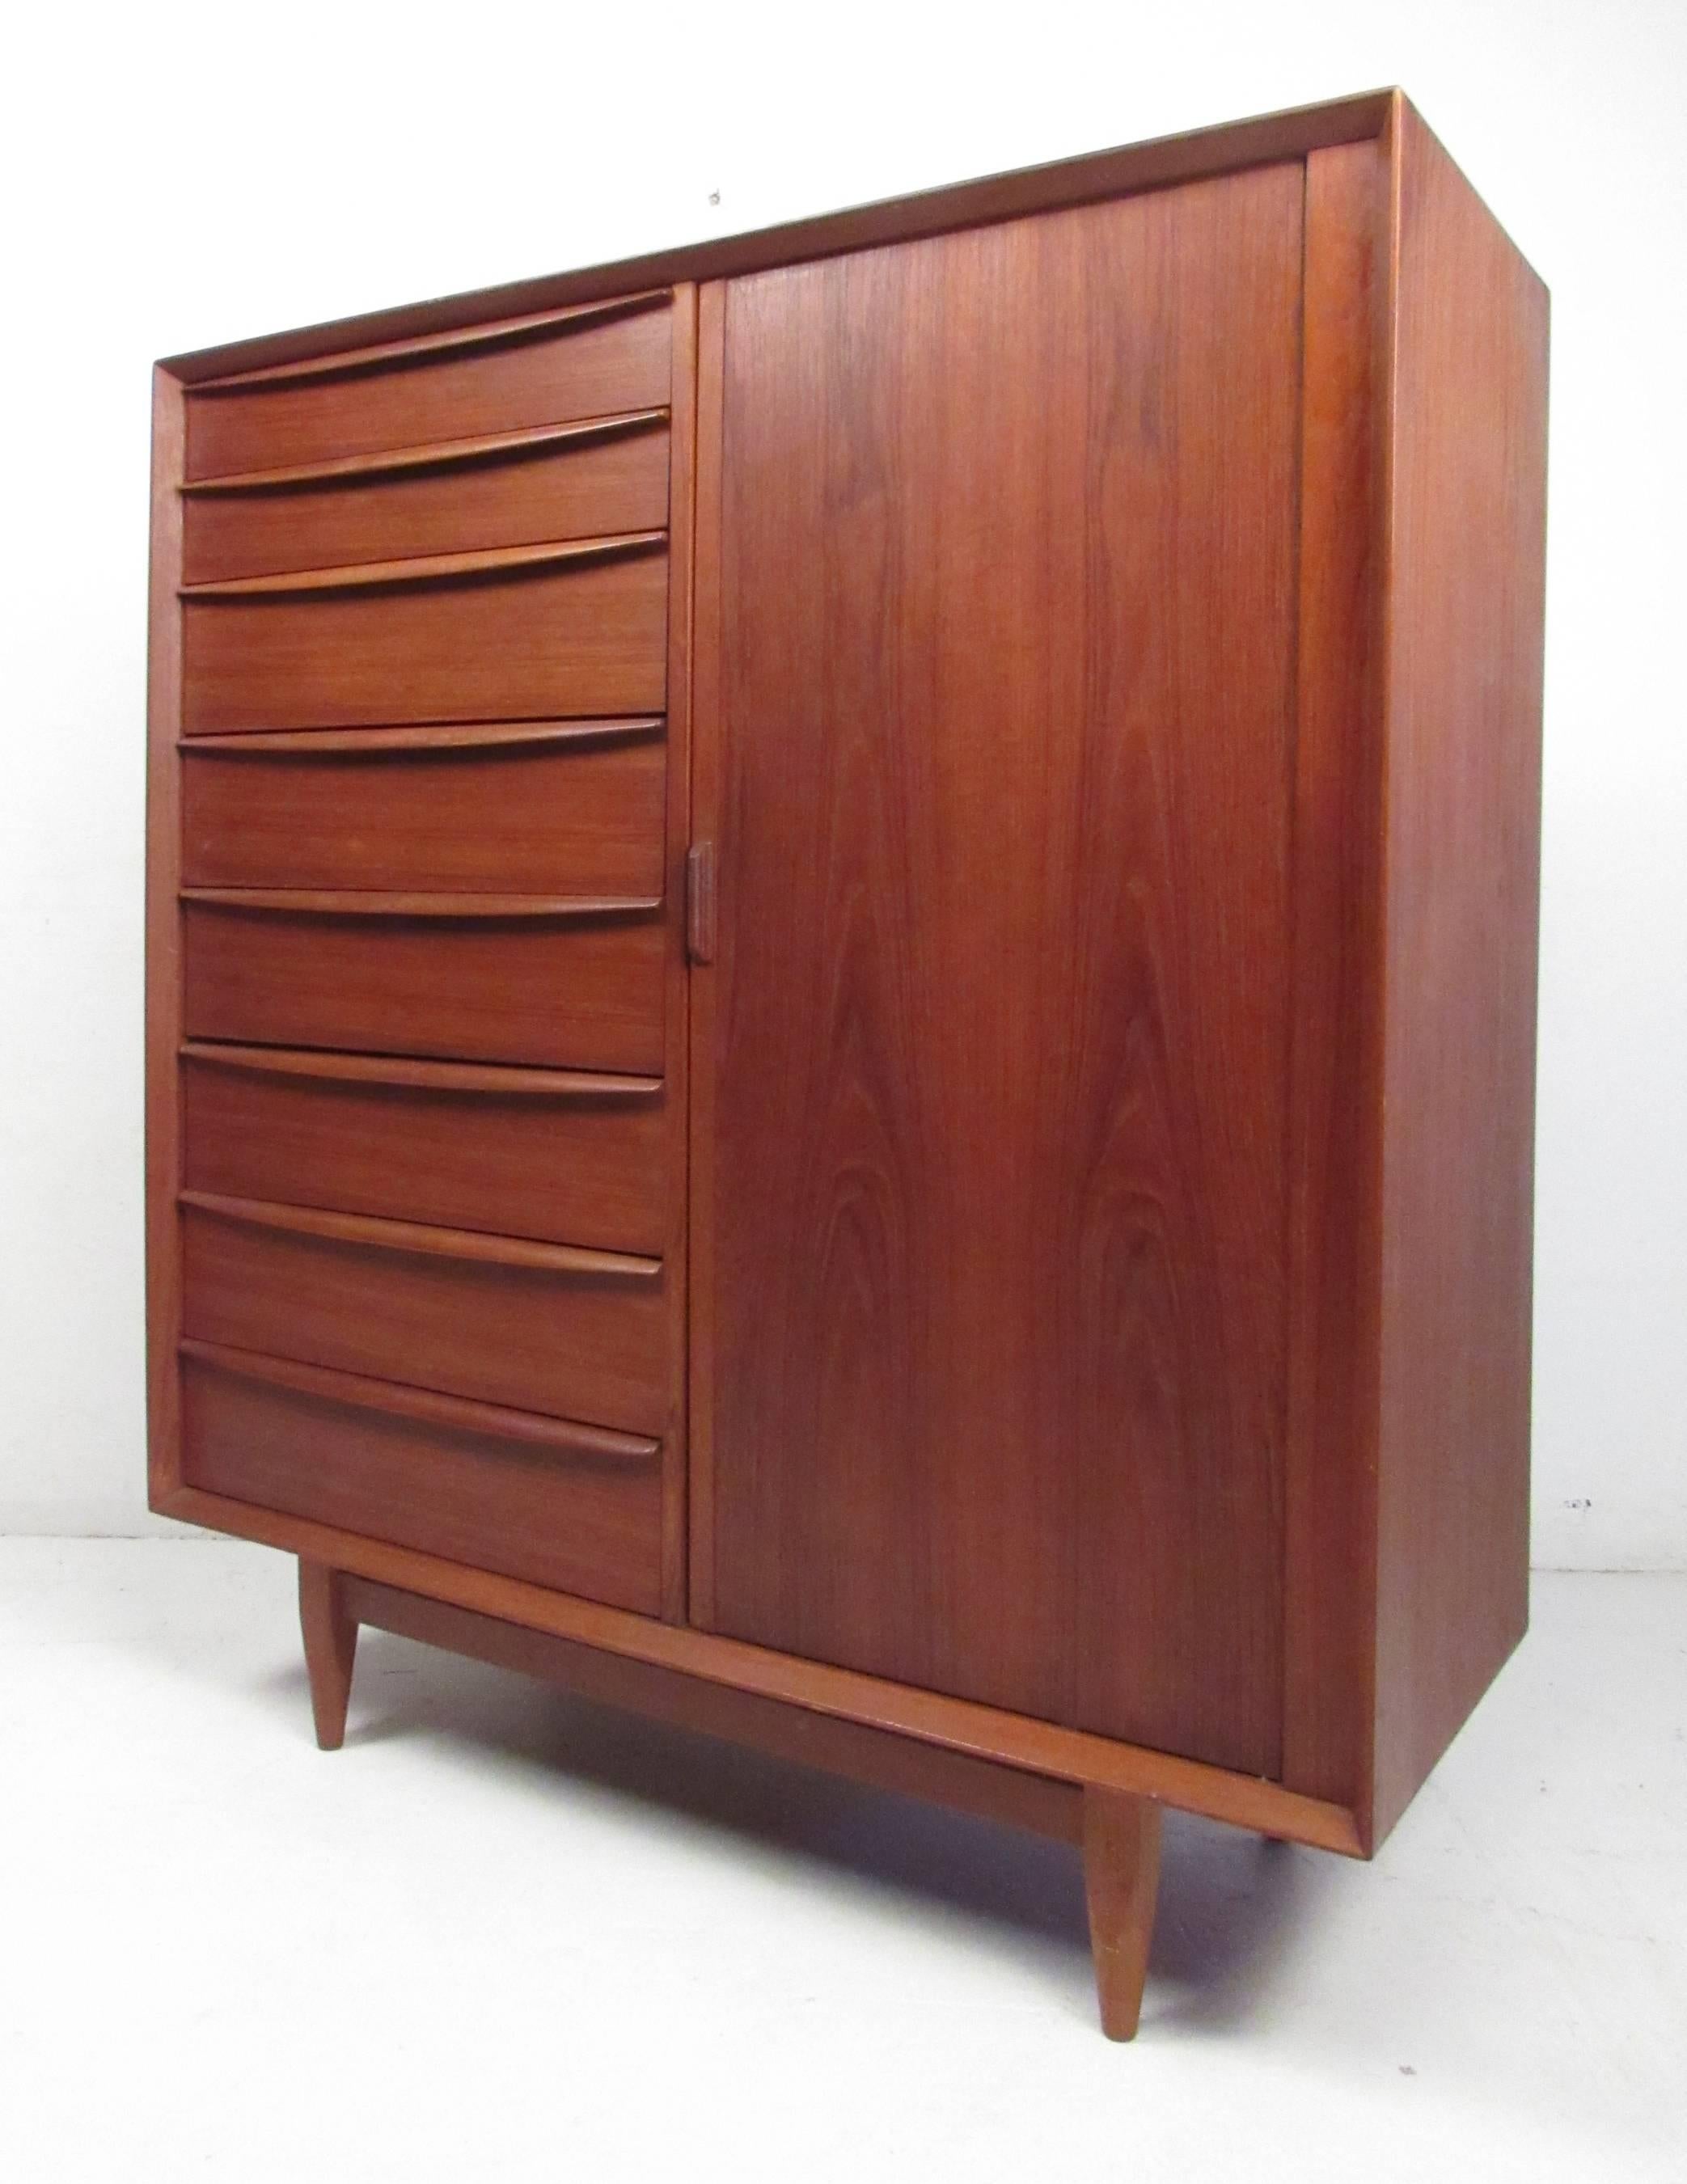 Quality teak Danish modern matching dresser and chest of drawers by Arne Wahl Iverson for Falster. Beautifully designed with multiple storage options, curved drawer pulls, dovetail construction, and tapered legs - this pair would make both a